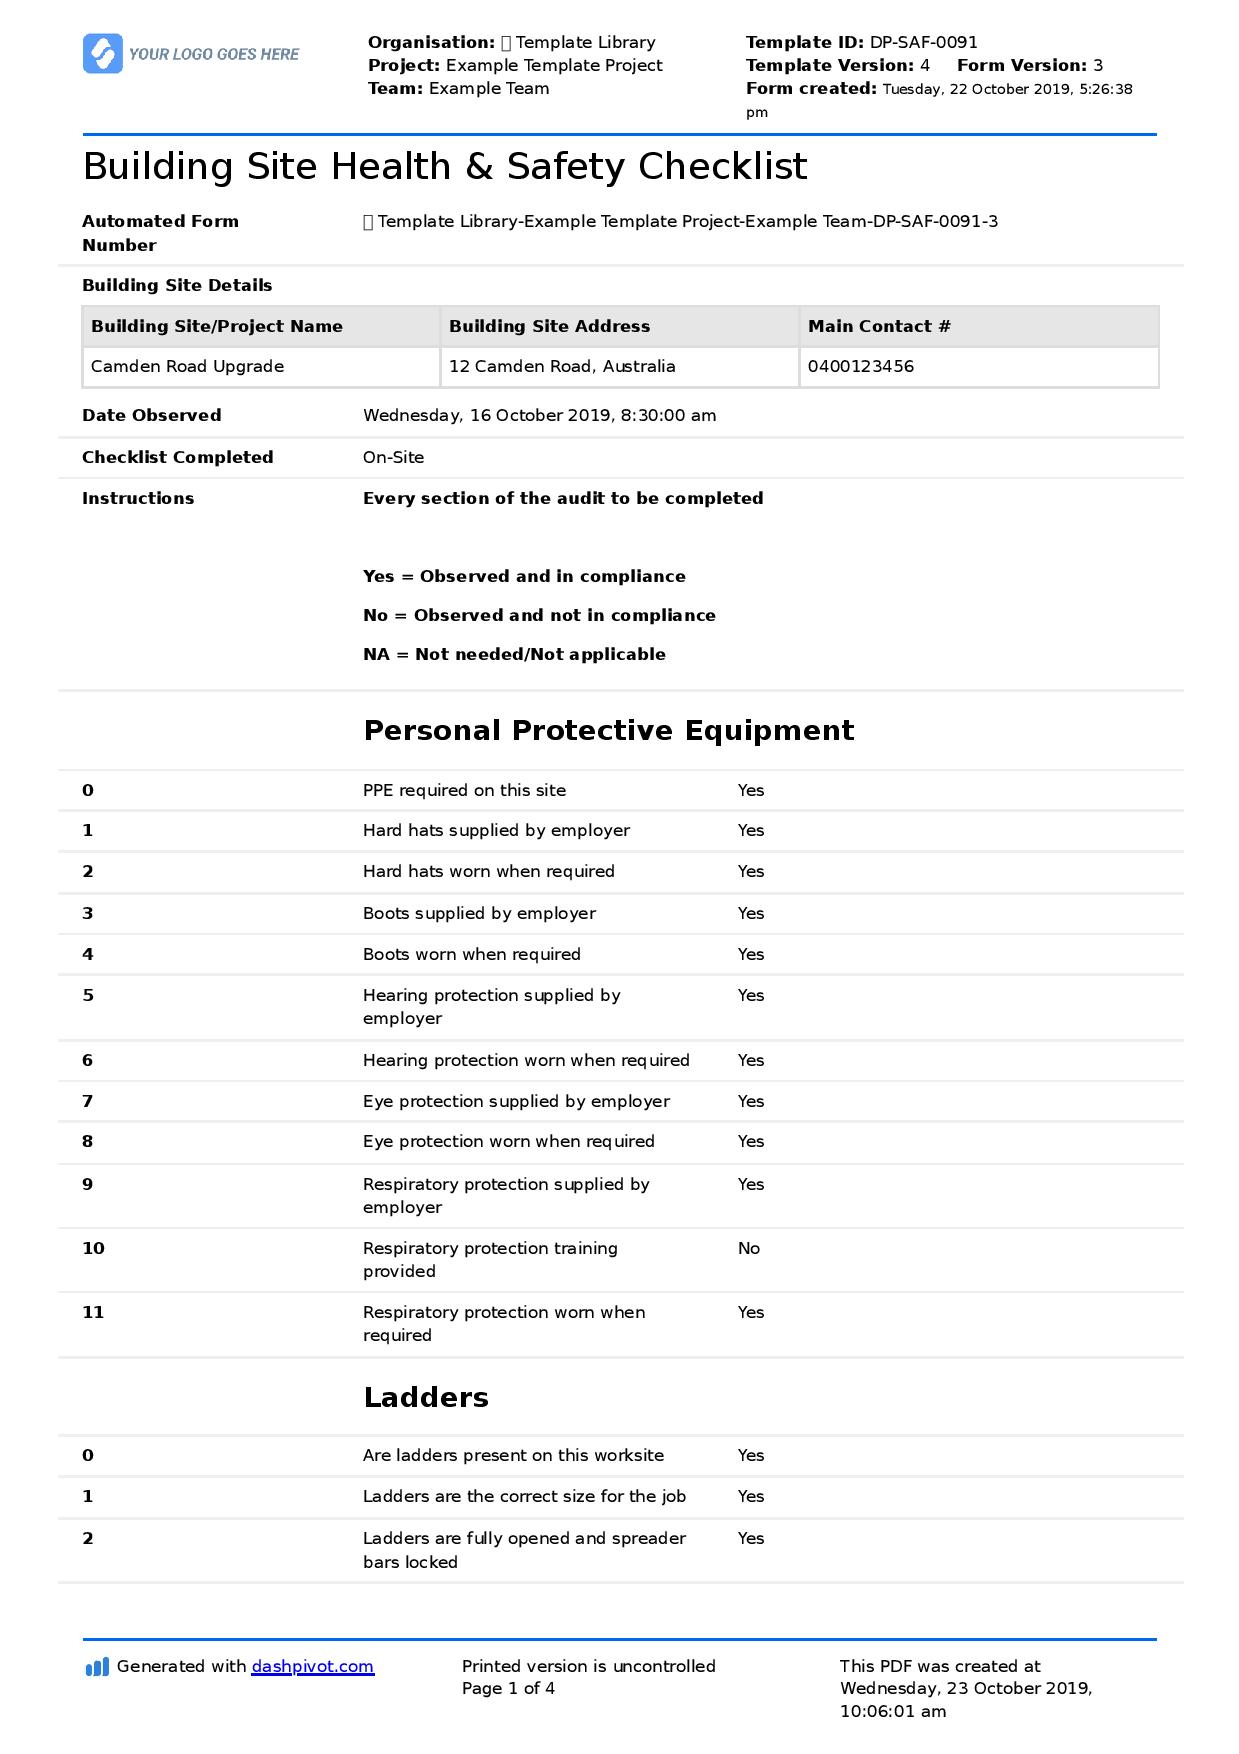 Building Site Health and Safety Checklist (Free template) Throughout Building Security Checklist Template With Building Security Checklist Template